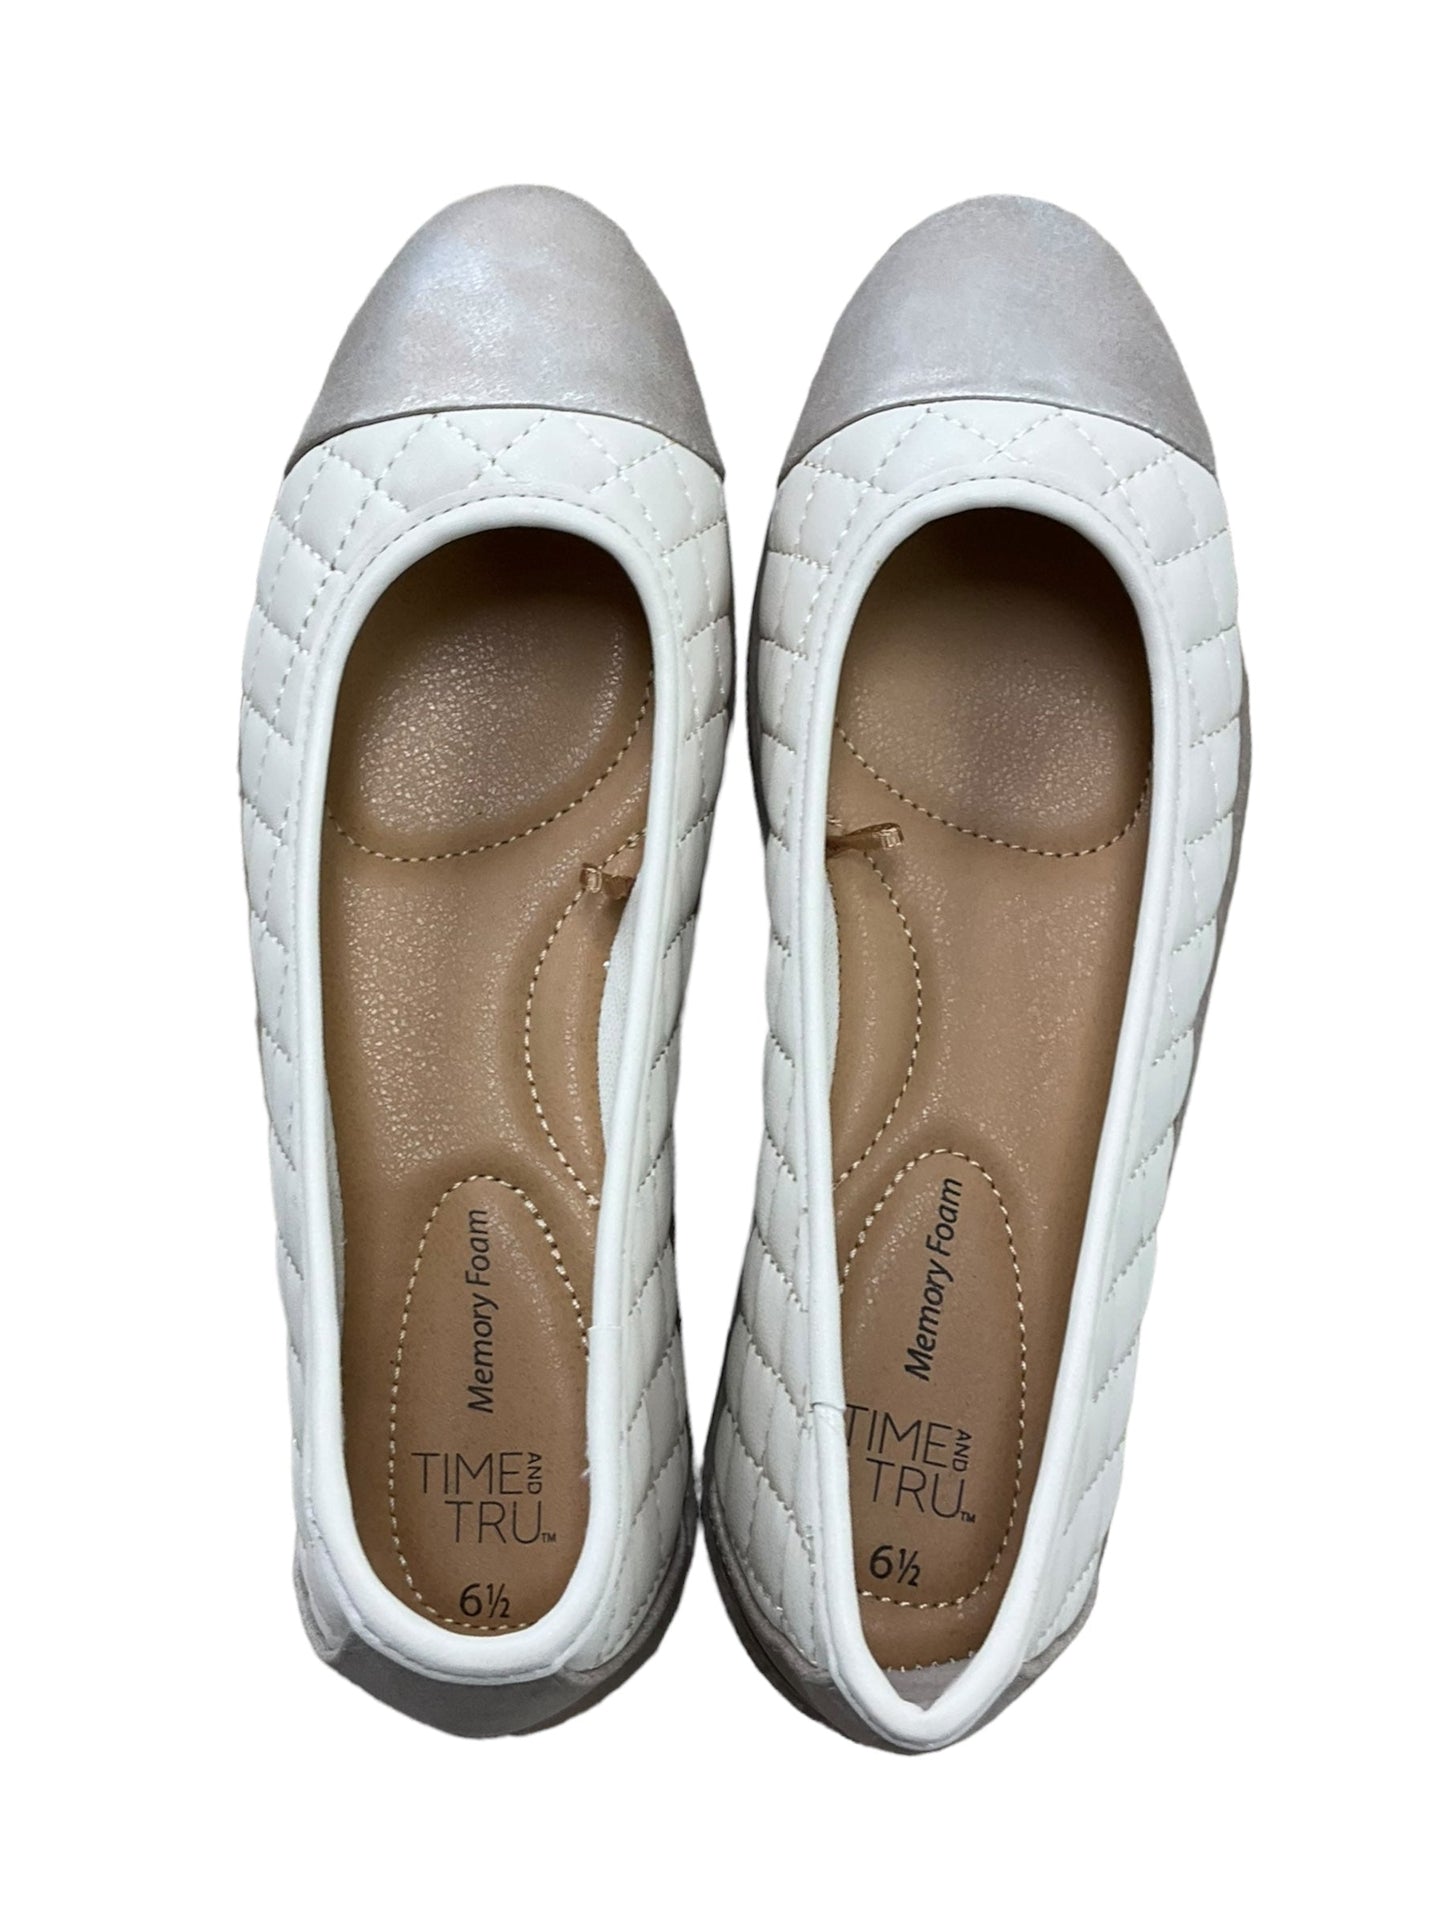 Cream & Grey Shoes Flats Time And Tru, Size 6.5